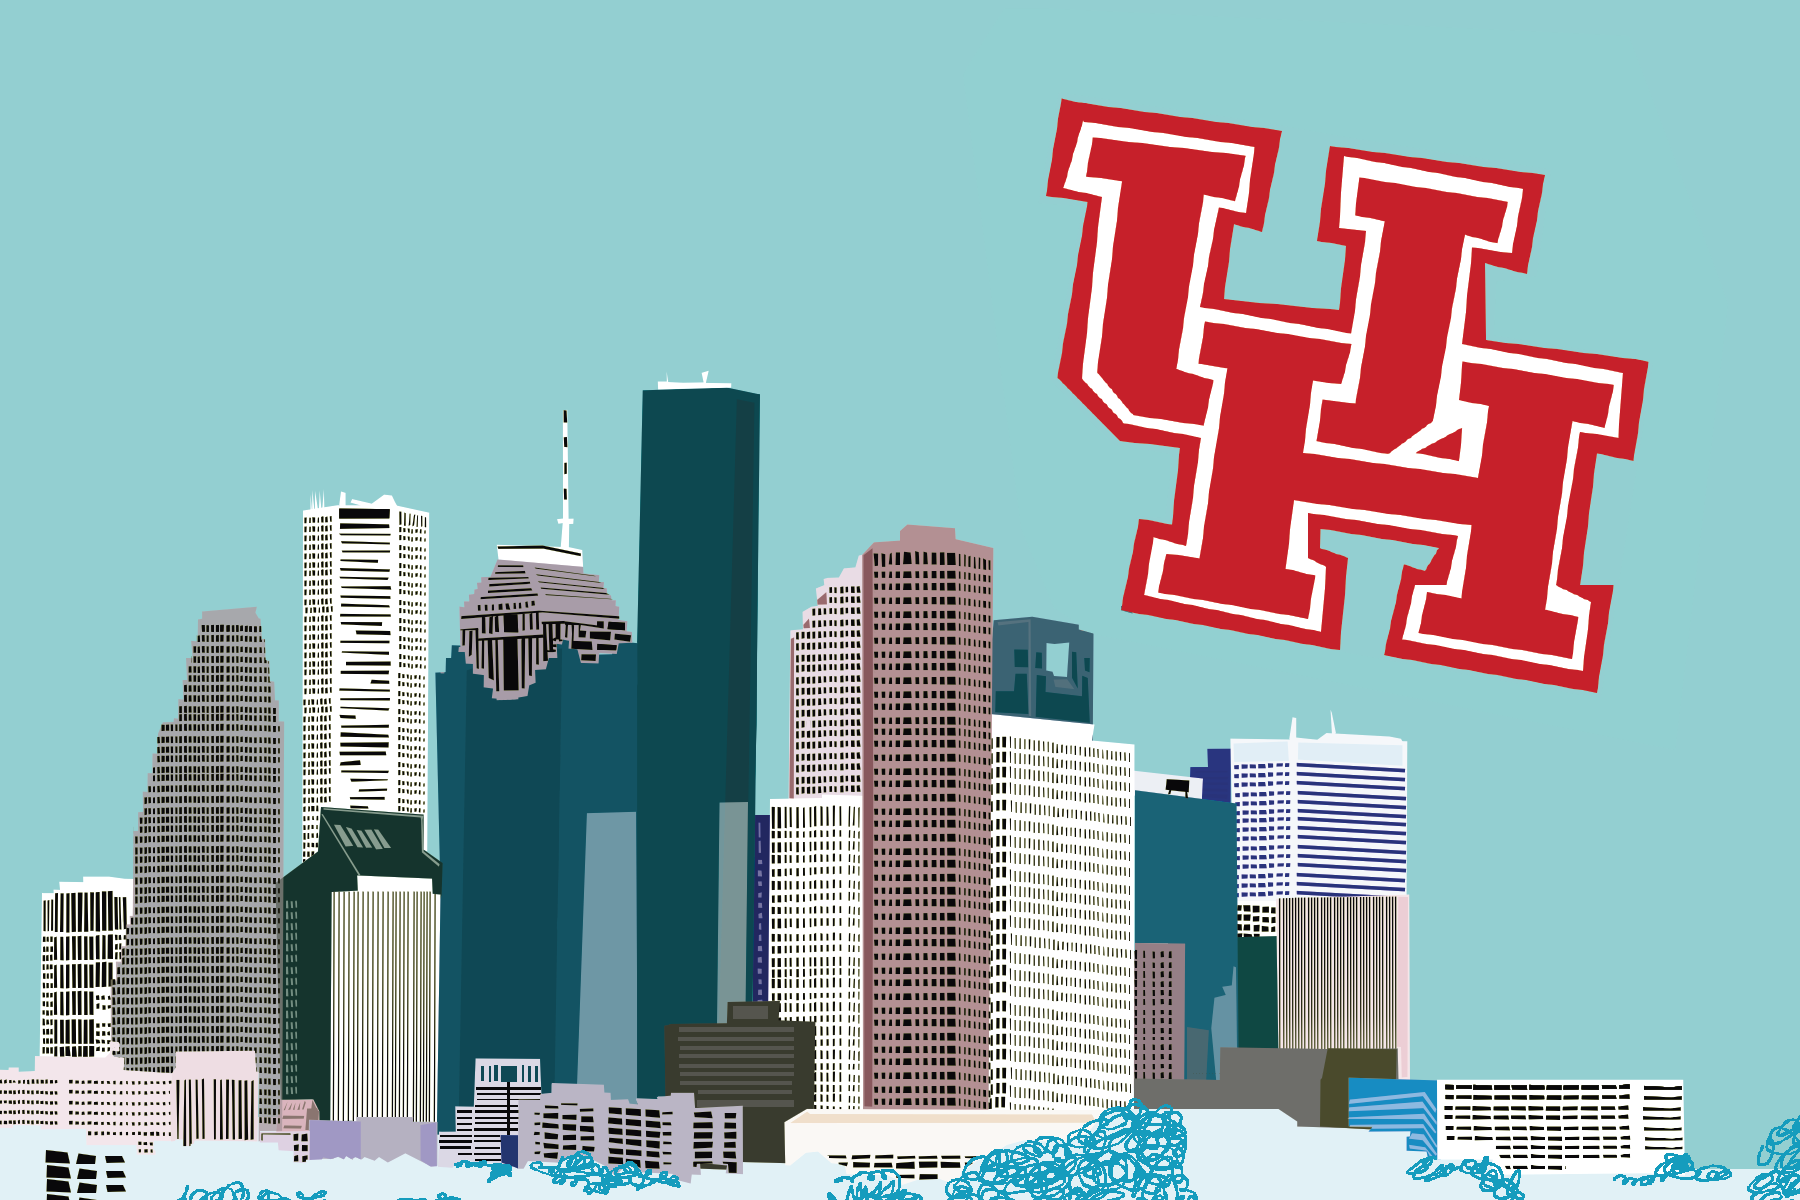 Campus changes are important to UH students and Houston alike